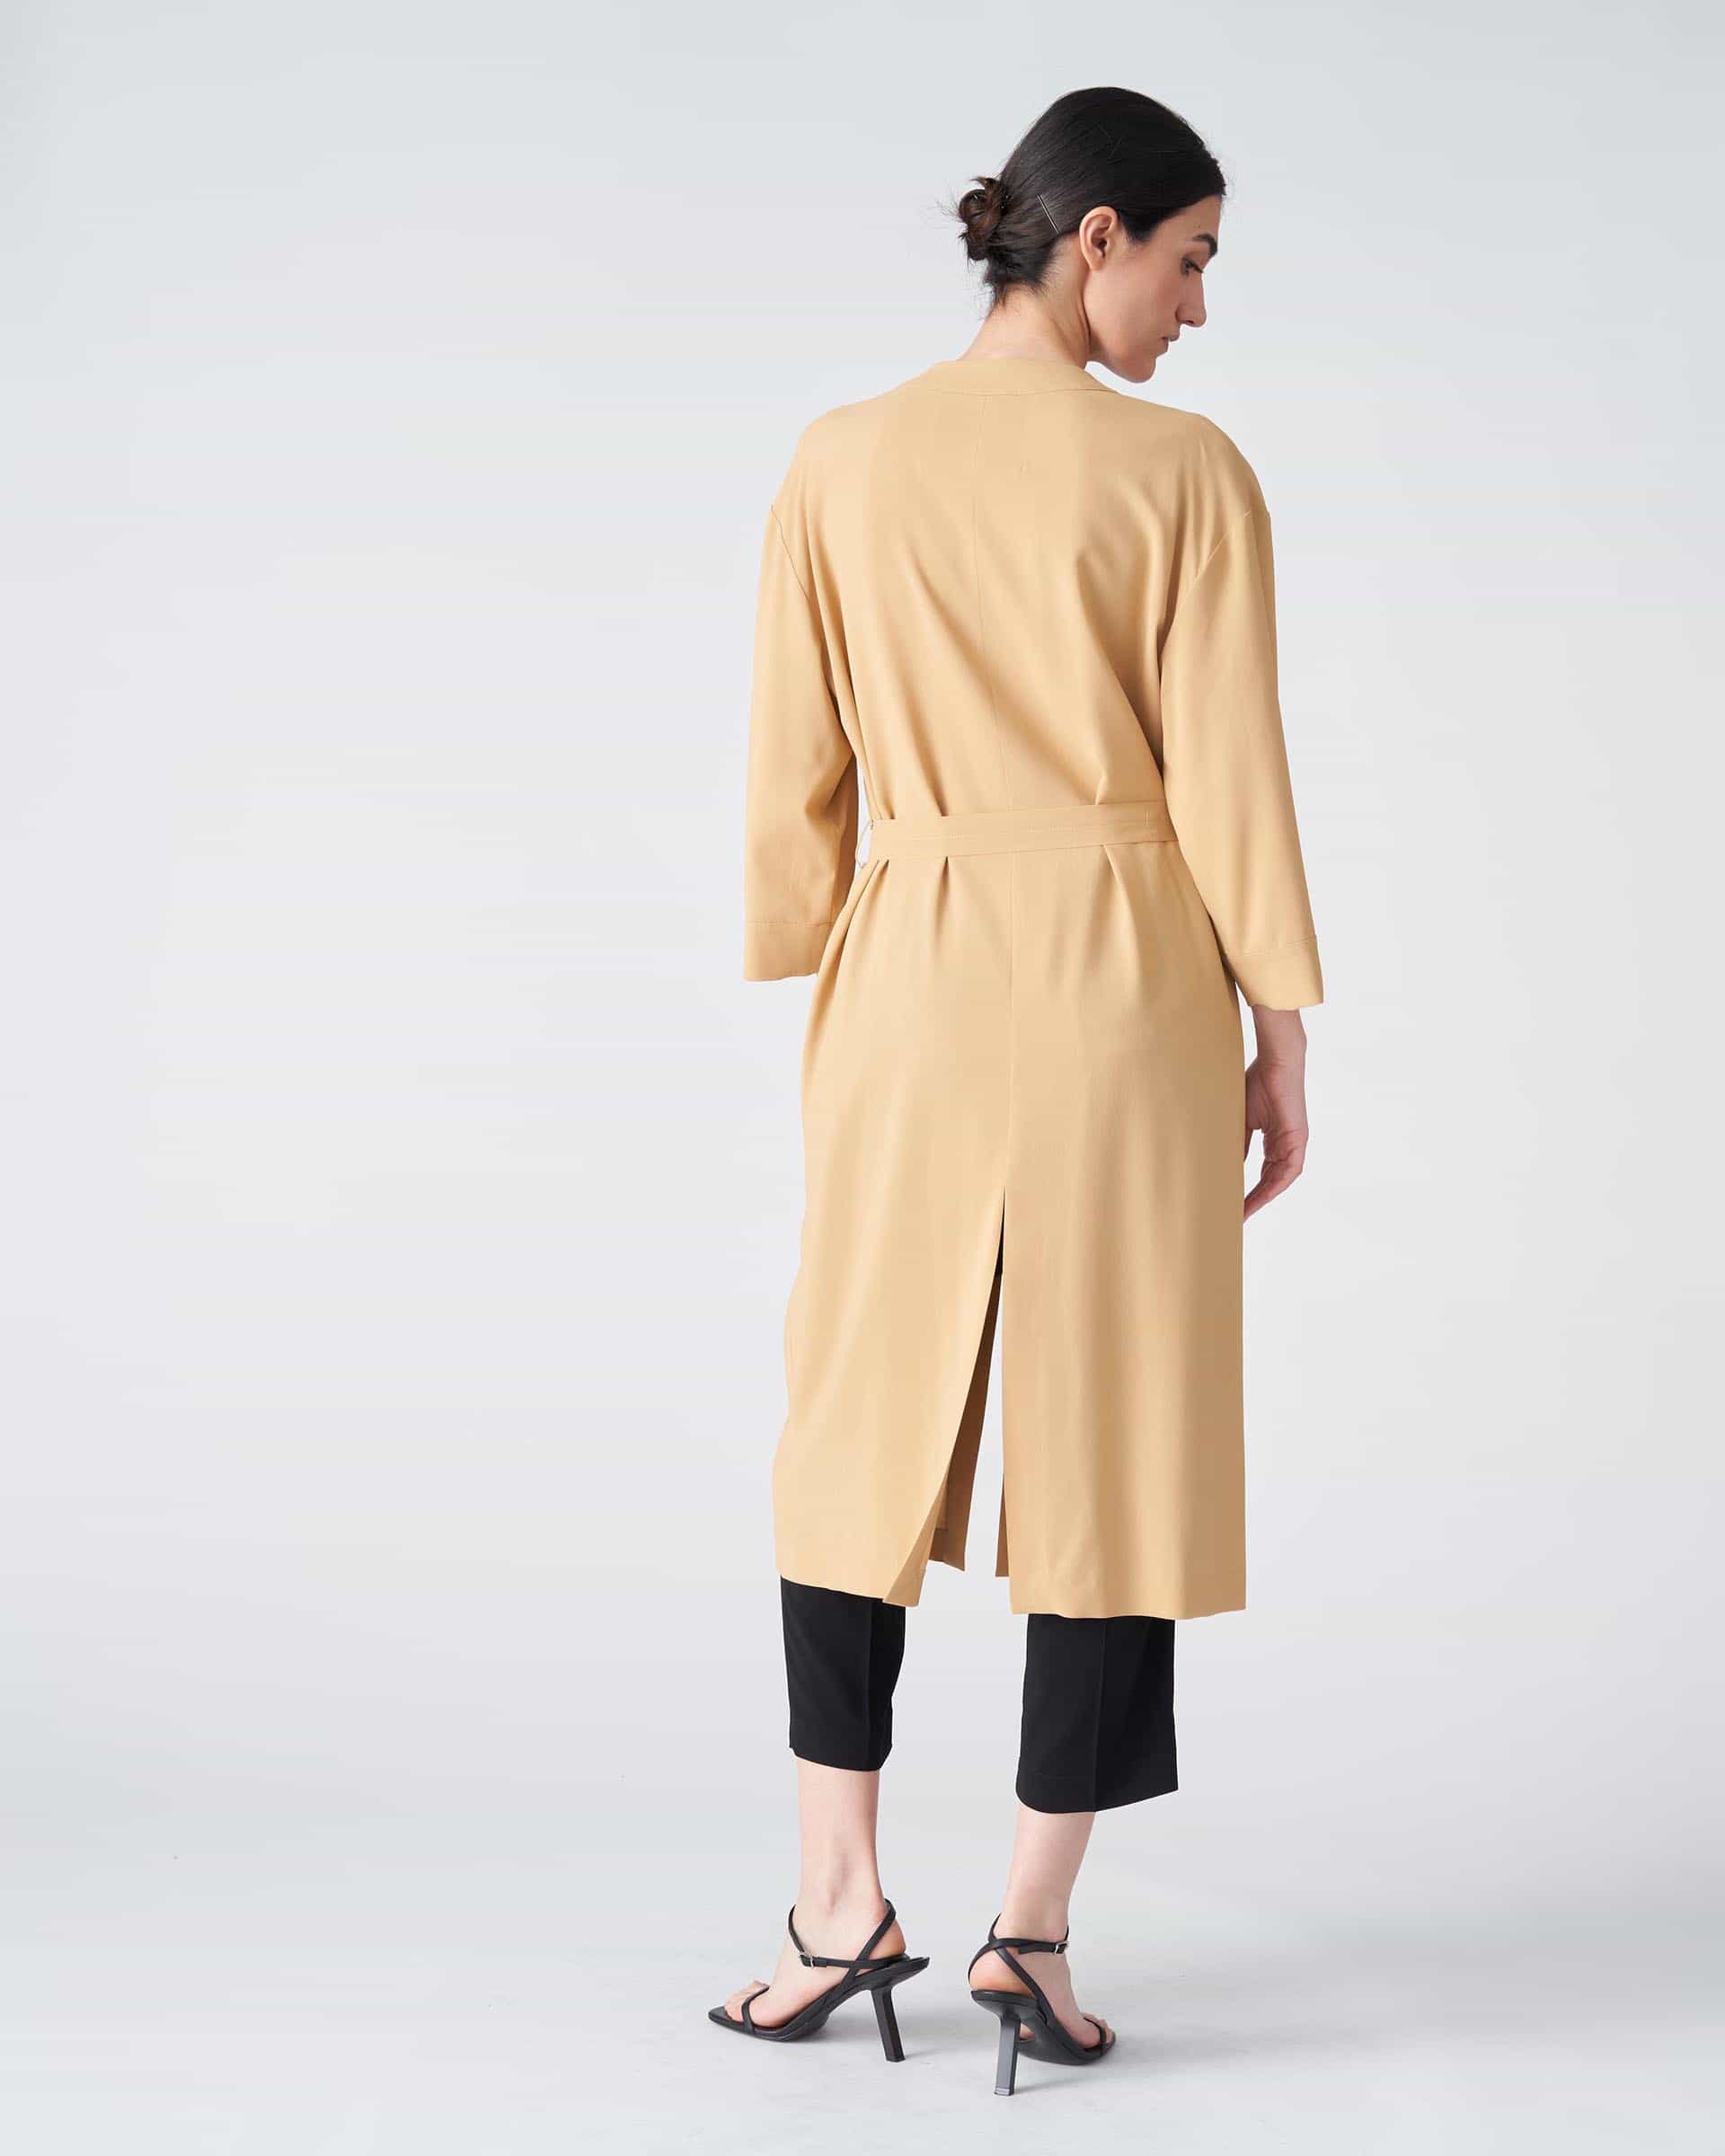 The Market Store | Long Cardigan With Belt